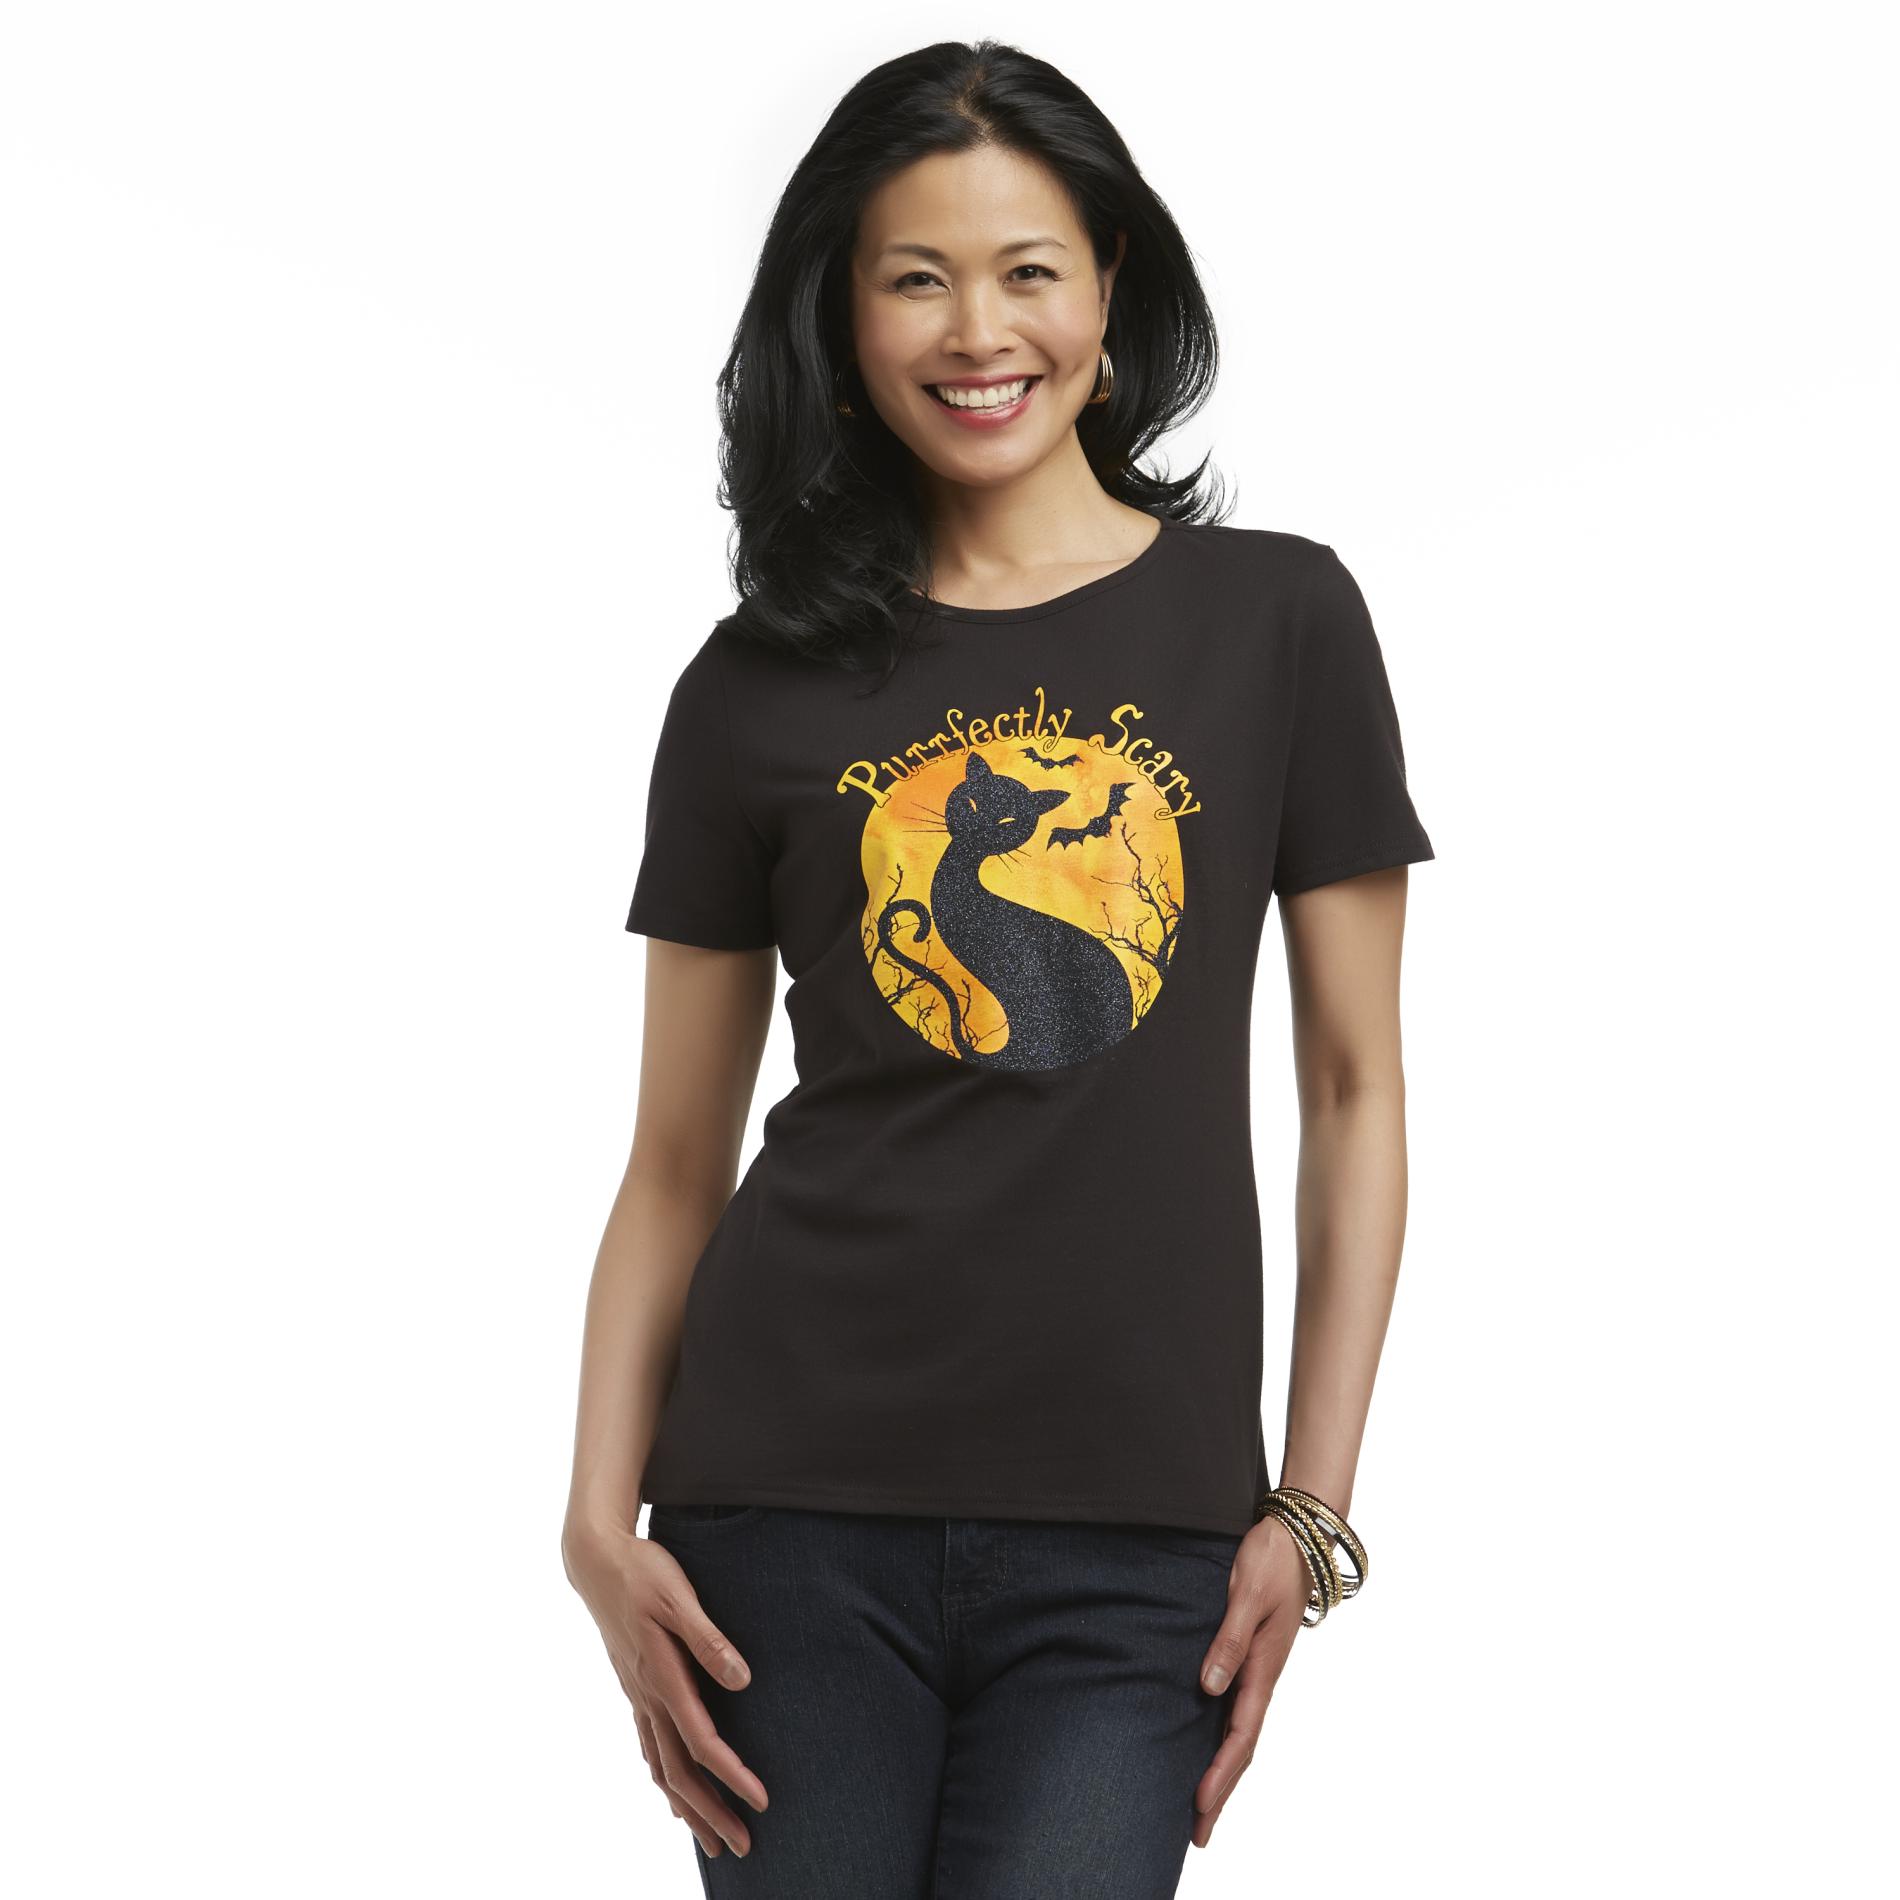 Holiday Editions Women's Graphic T-Shirt - Halloween Cat